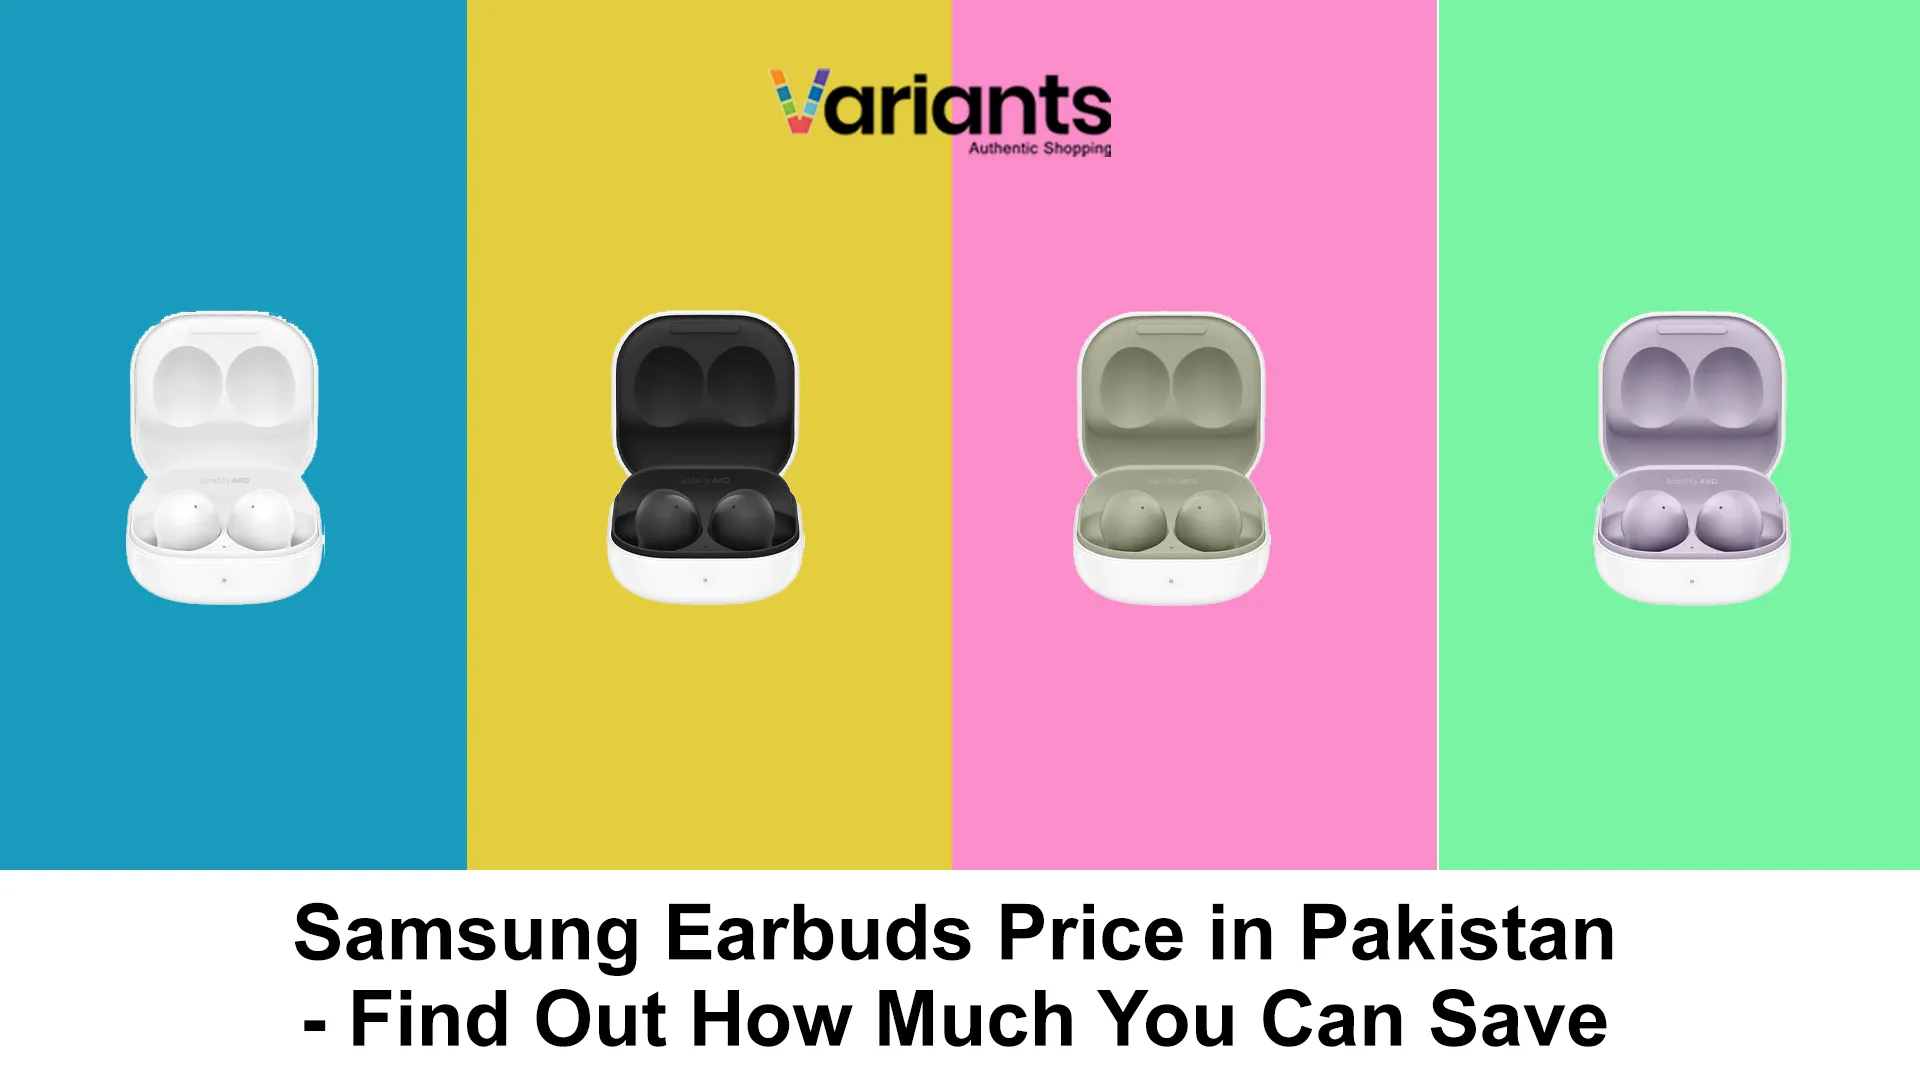 Find Out How Much You Can Save | Samsung Earbuds Price in Pakistan blog